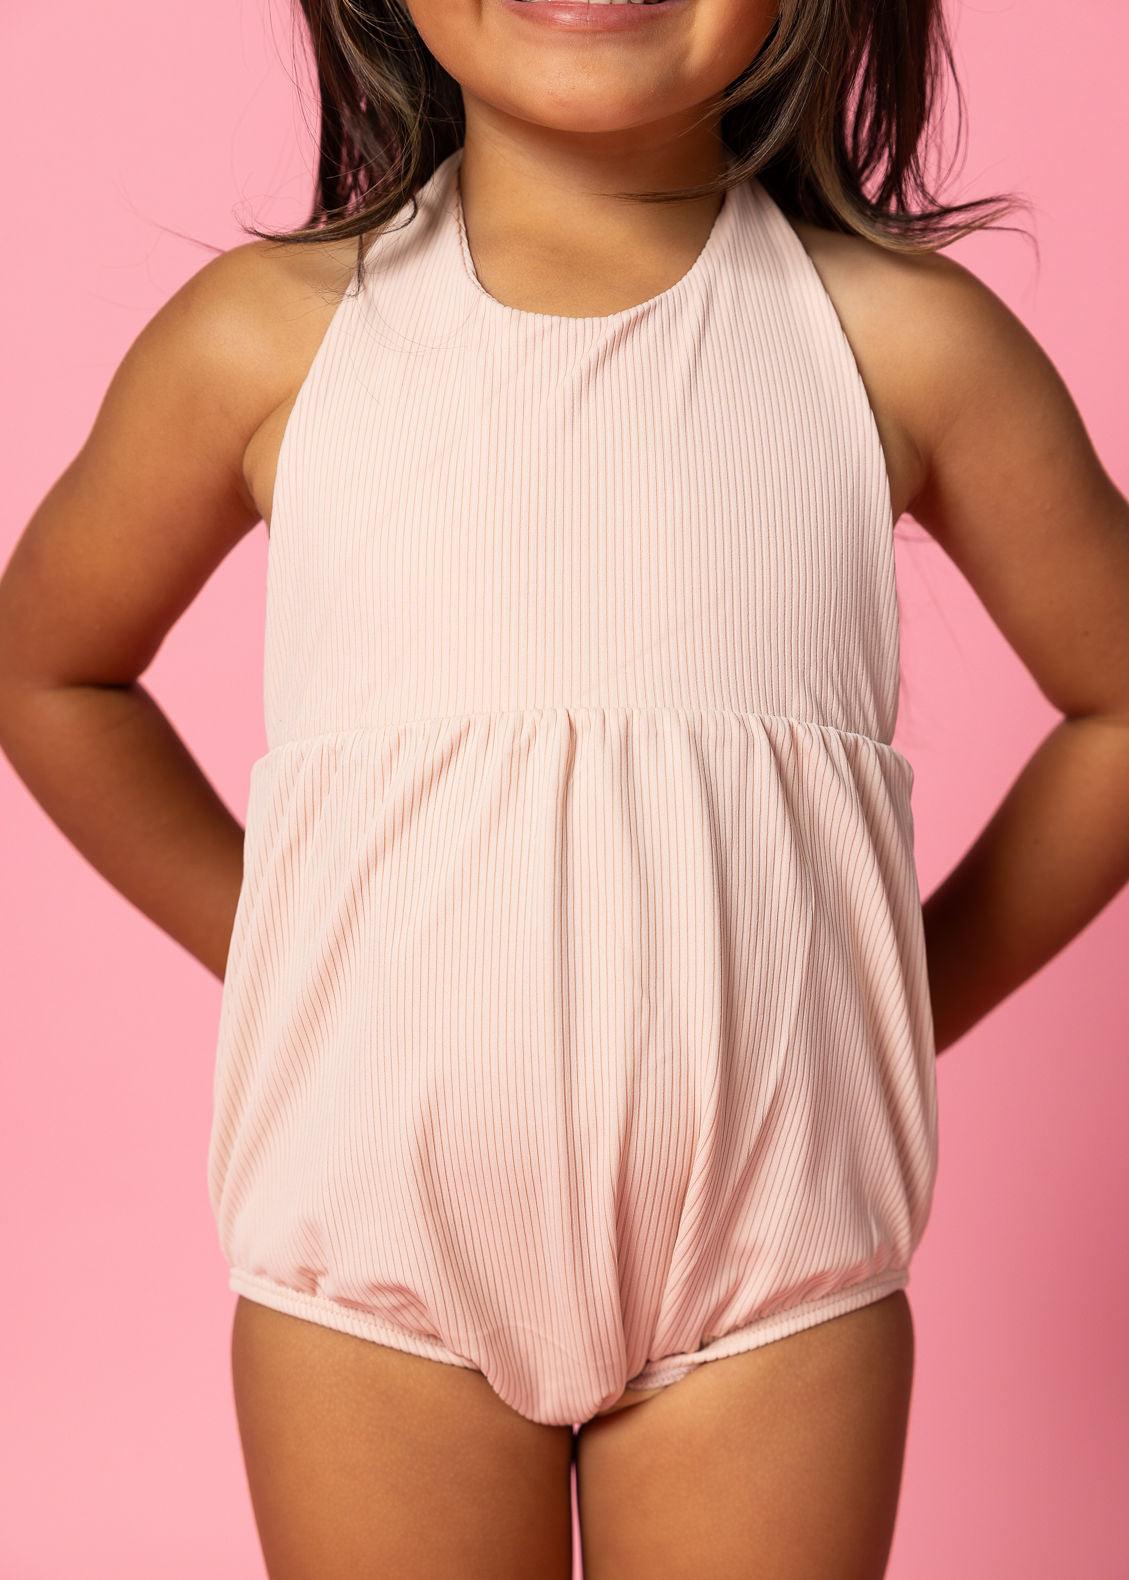 Girls One-Piece Swimsuit - Ribbed Whipped Peach